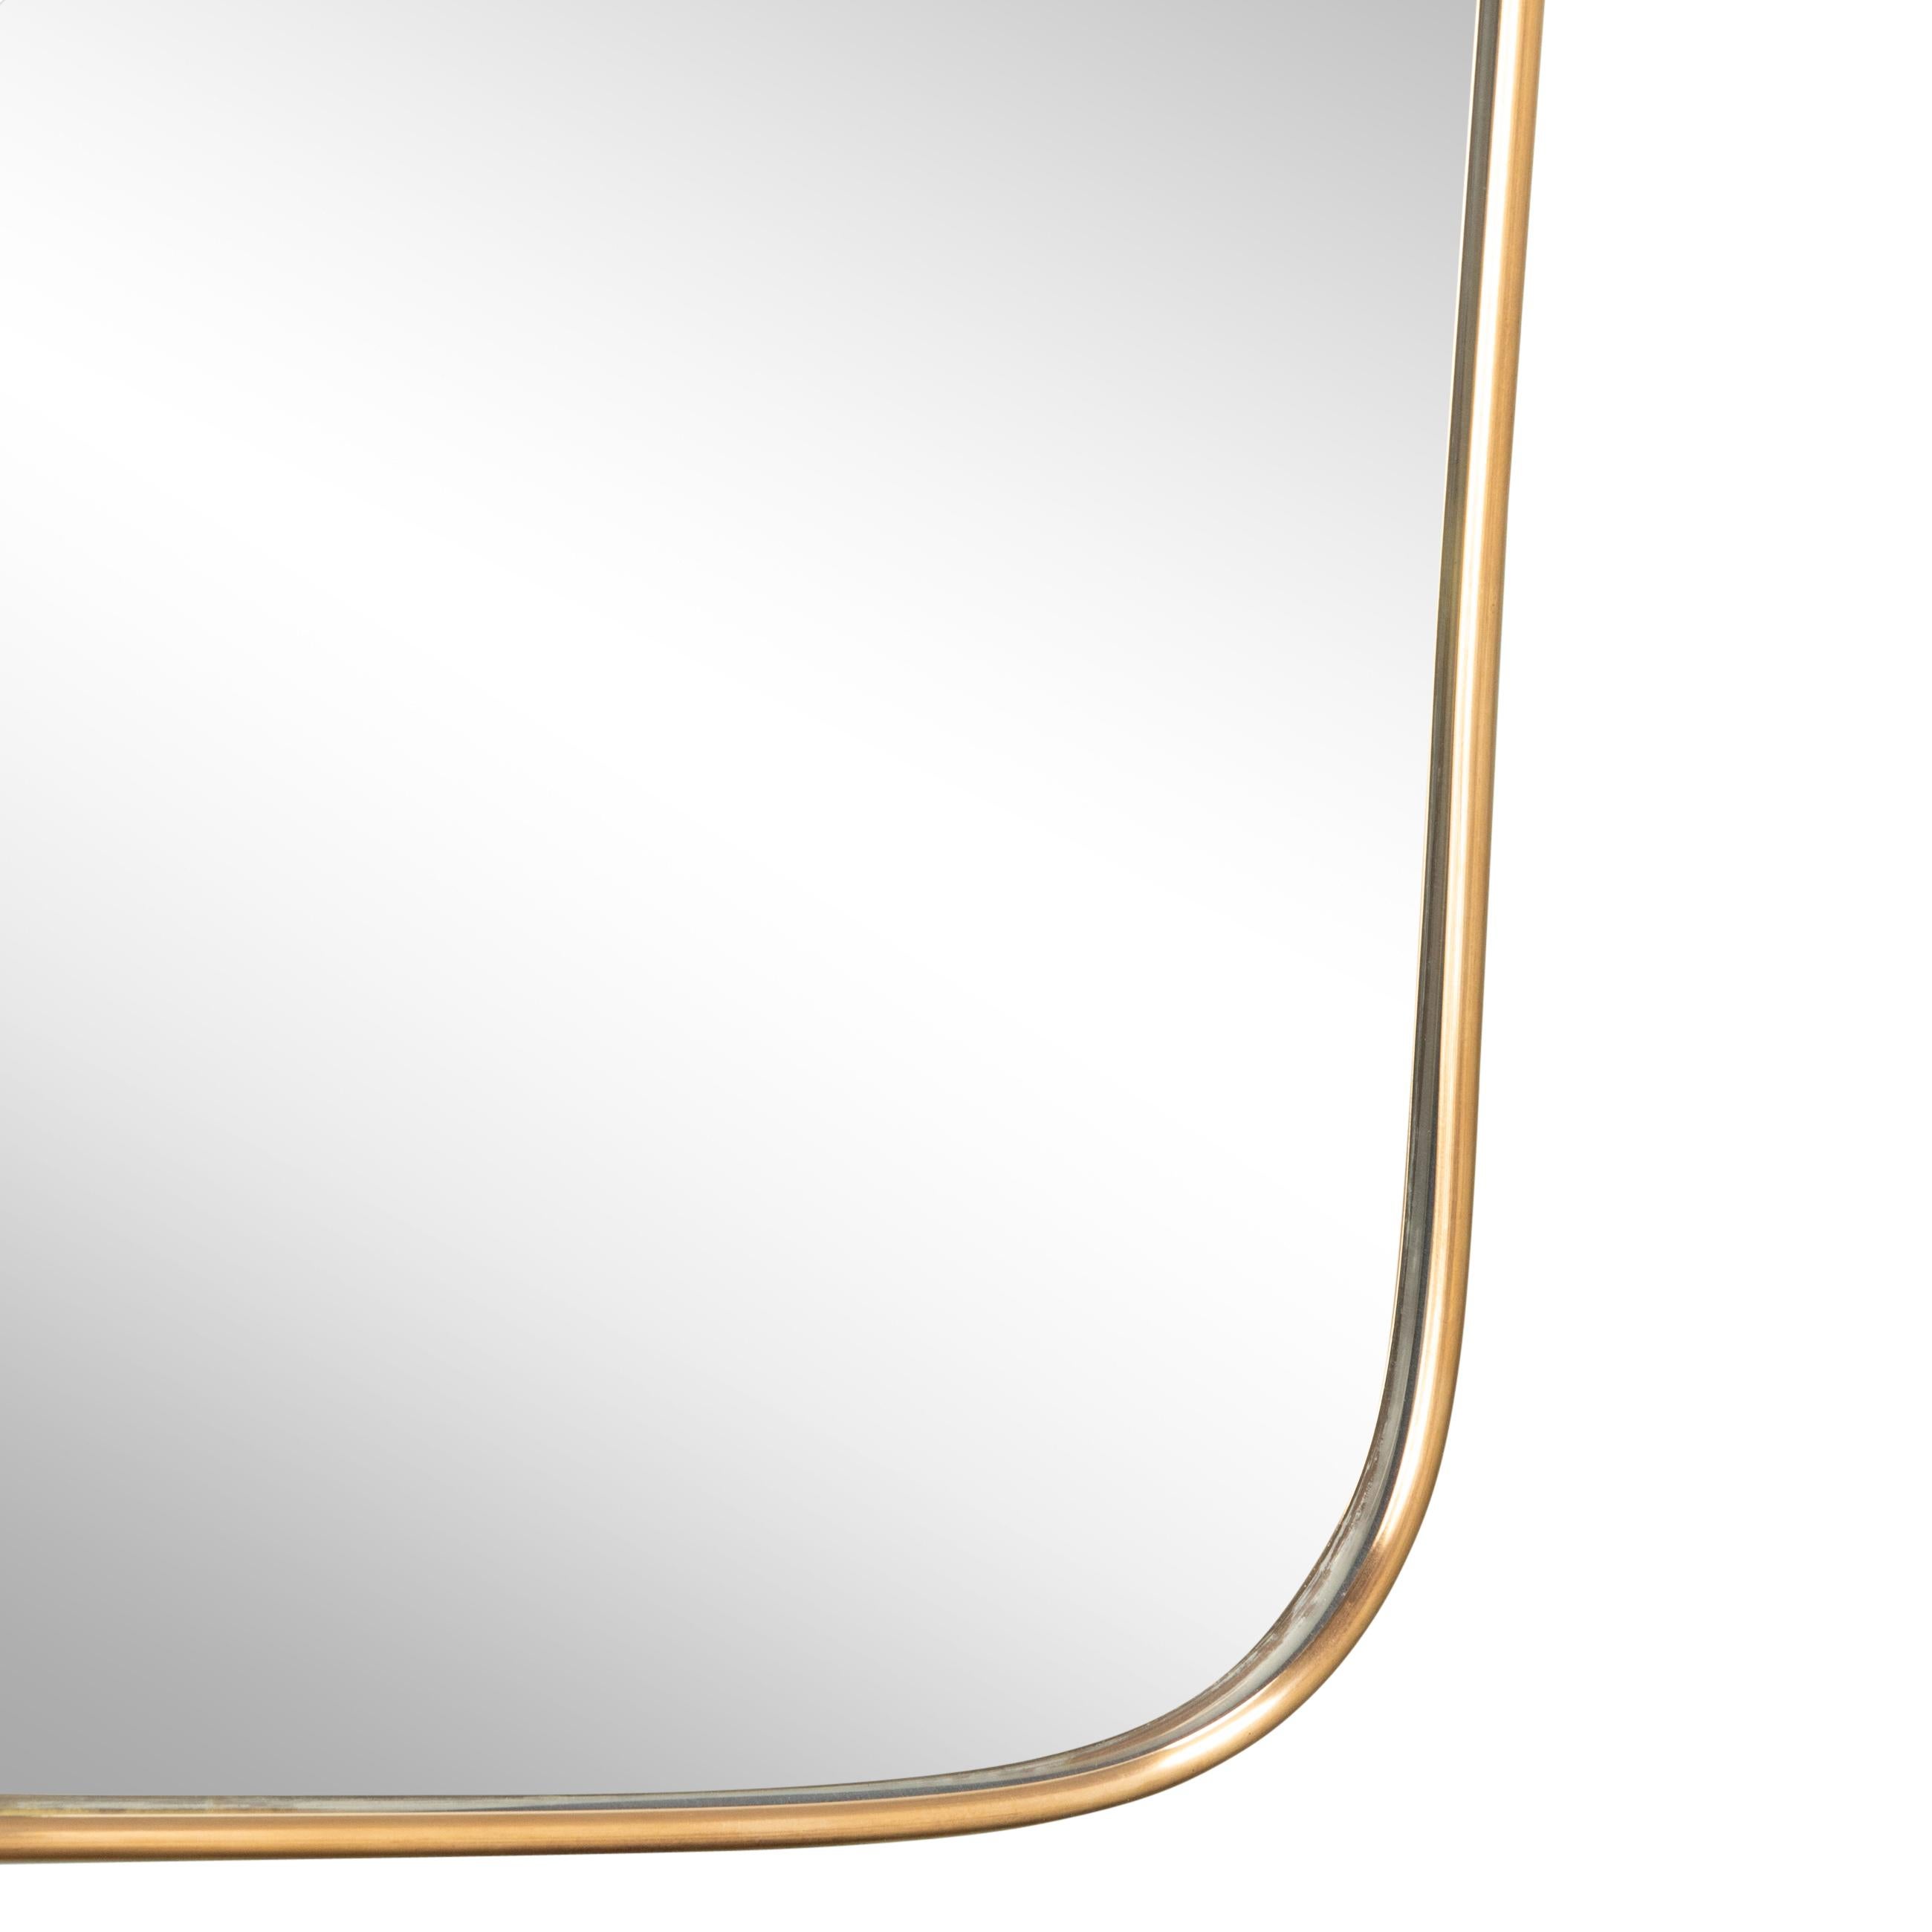 Brass Framed mirror in the style of Gio Ponti
Curved edges.
Italy, circa 1950. 

Dimensions, Measures: 

Hauteur / Height : 90 cm / 35.4 inch 
Largeur en haut / Width at the top : 60 cm / 23.6 inch 
Largeur en bas / Width at the bottom :53.5